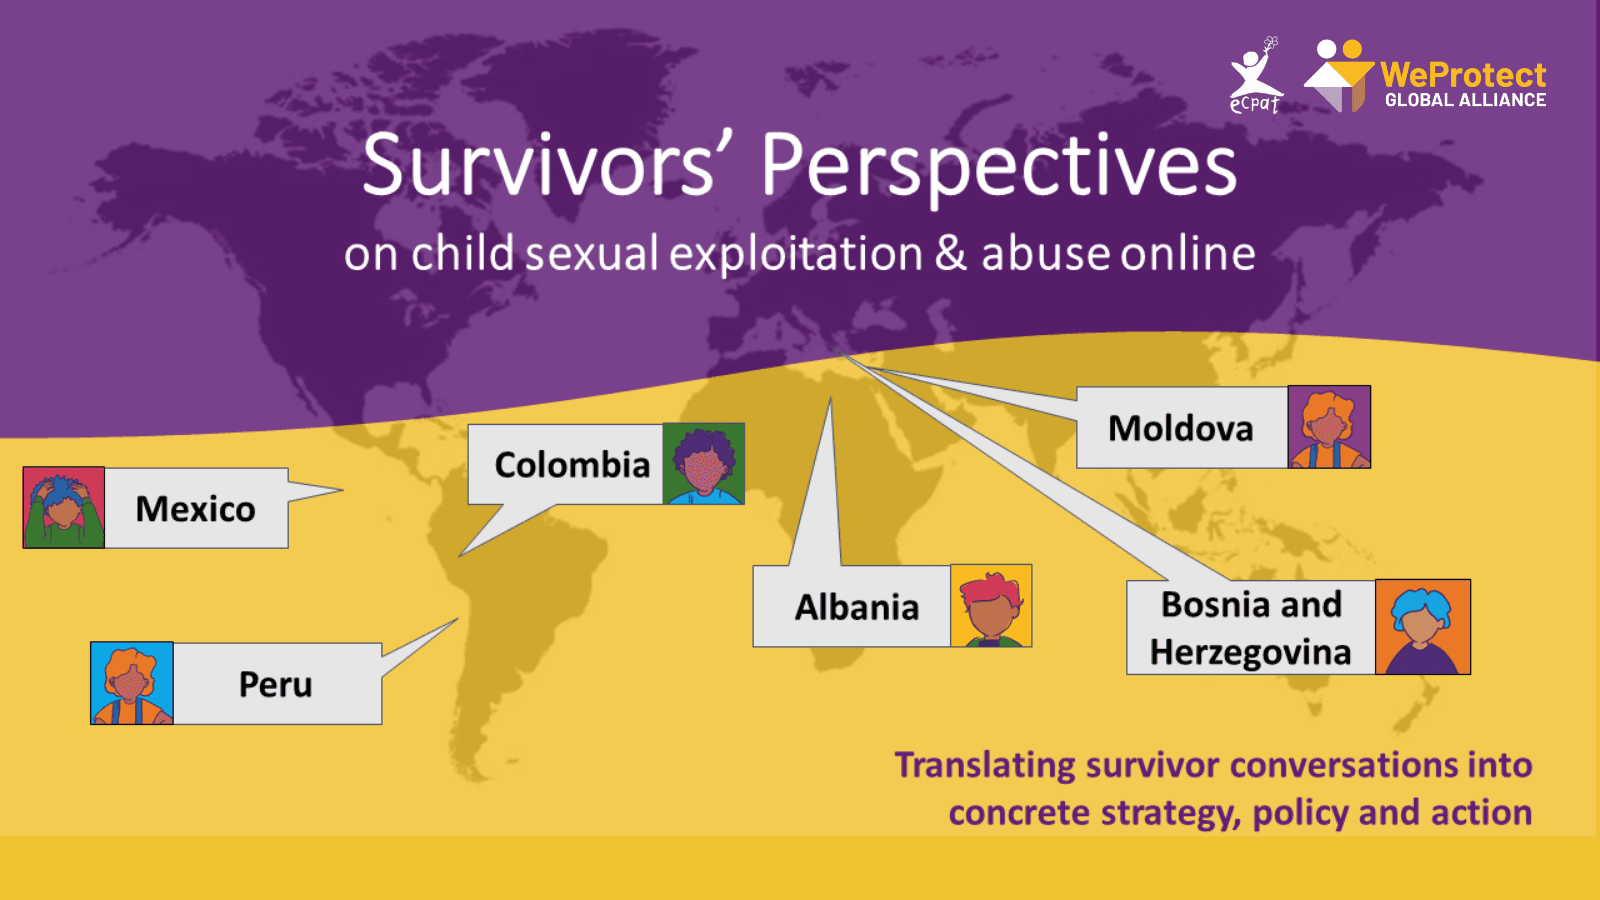 Survivors' Perspectives - WeProtect Global Alliance